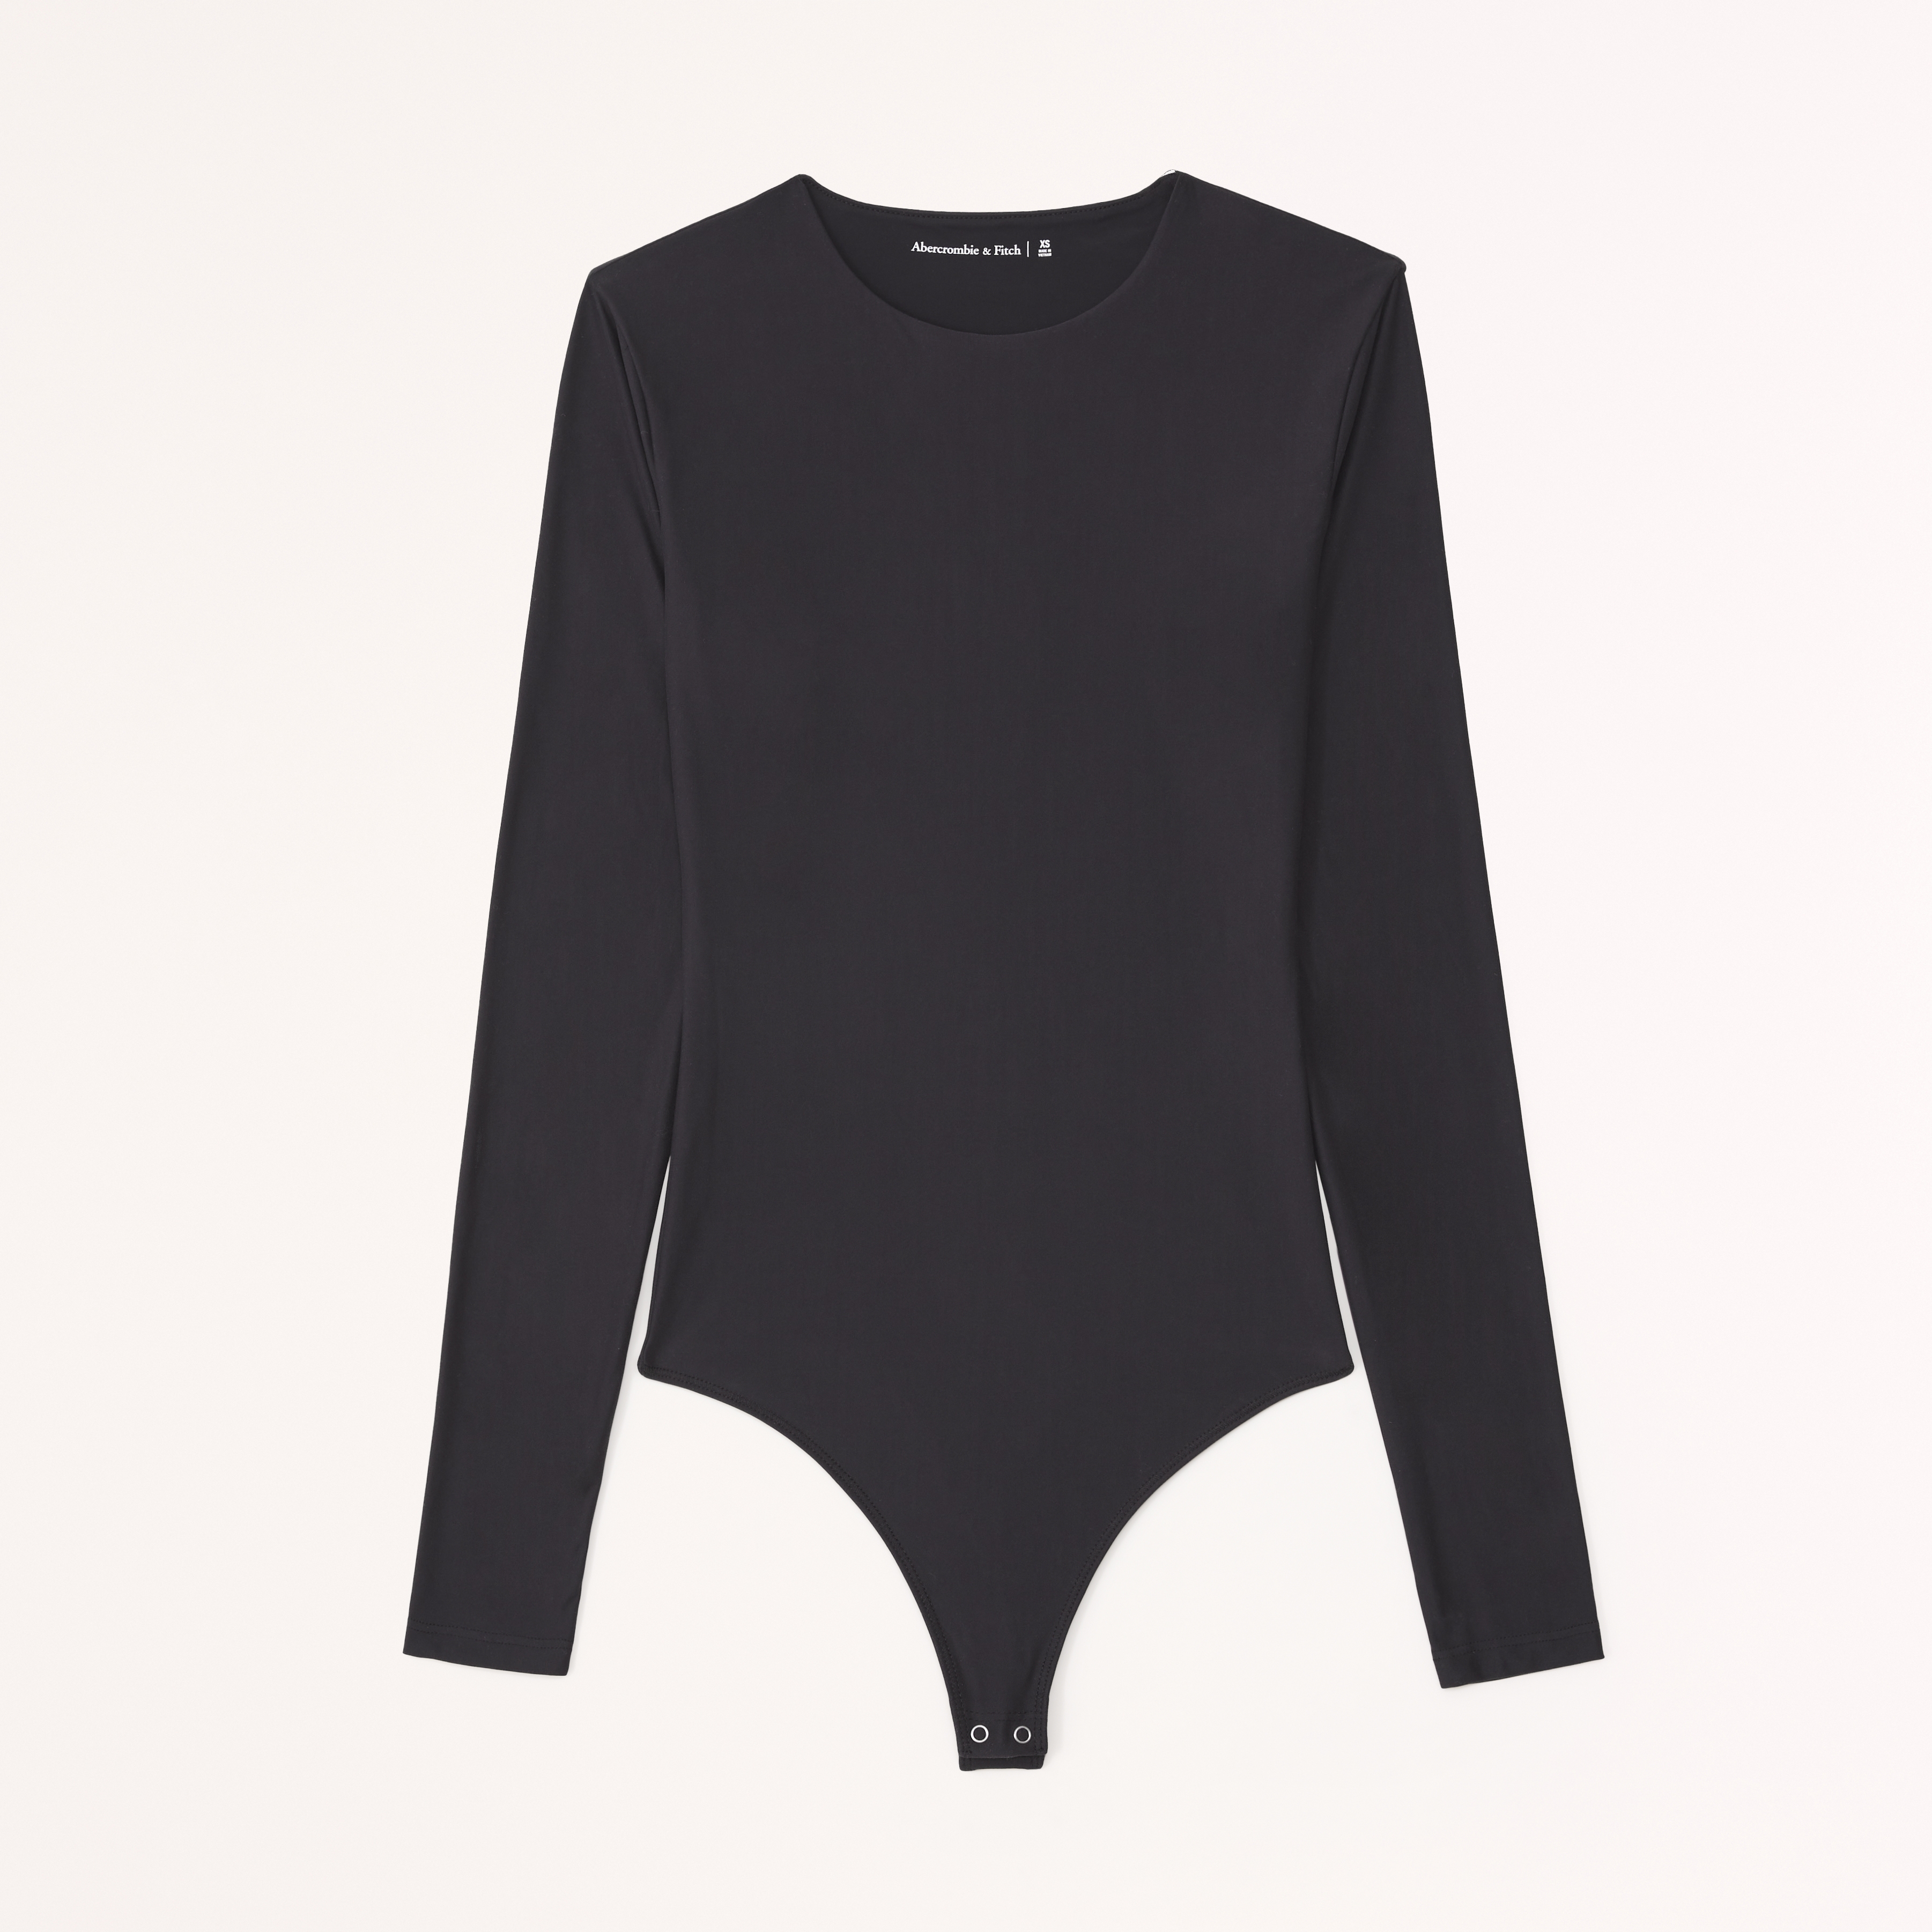 Abercrombie & Fitch Soft Matte Seamless Long-Sleeve Crew Bodysuit